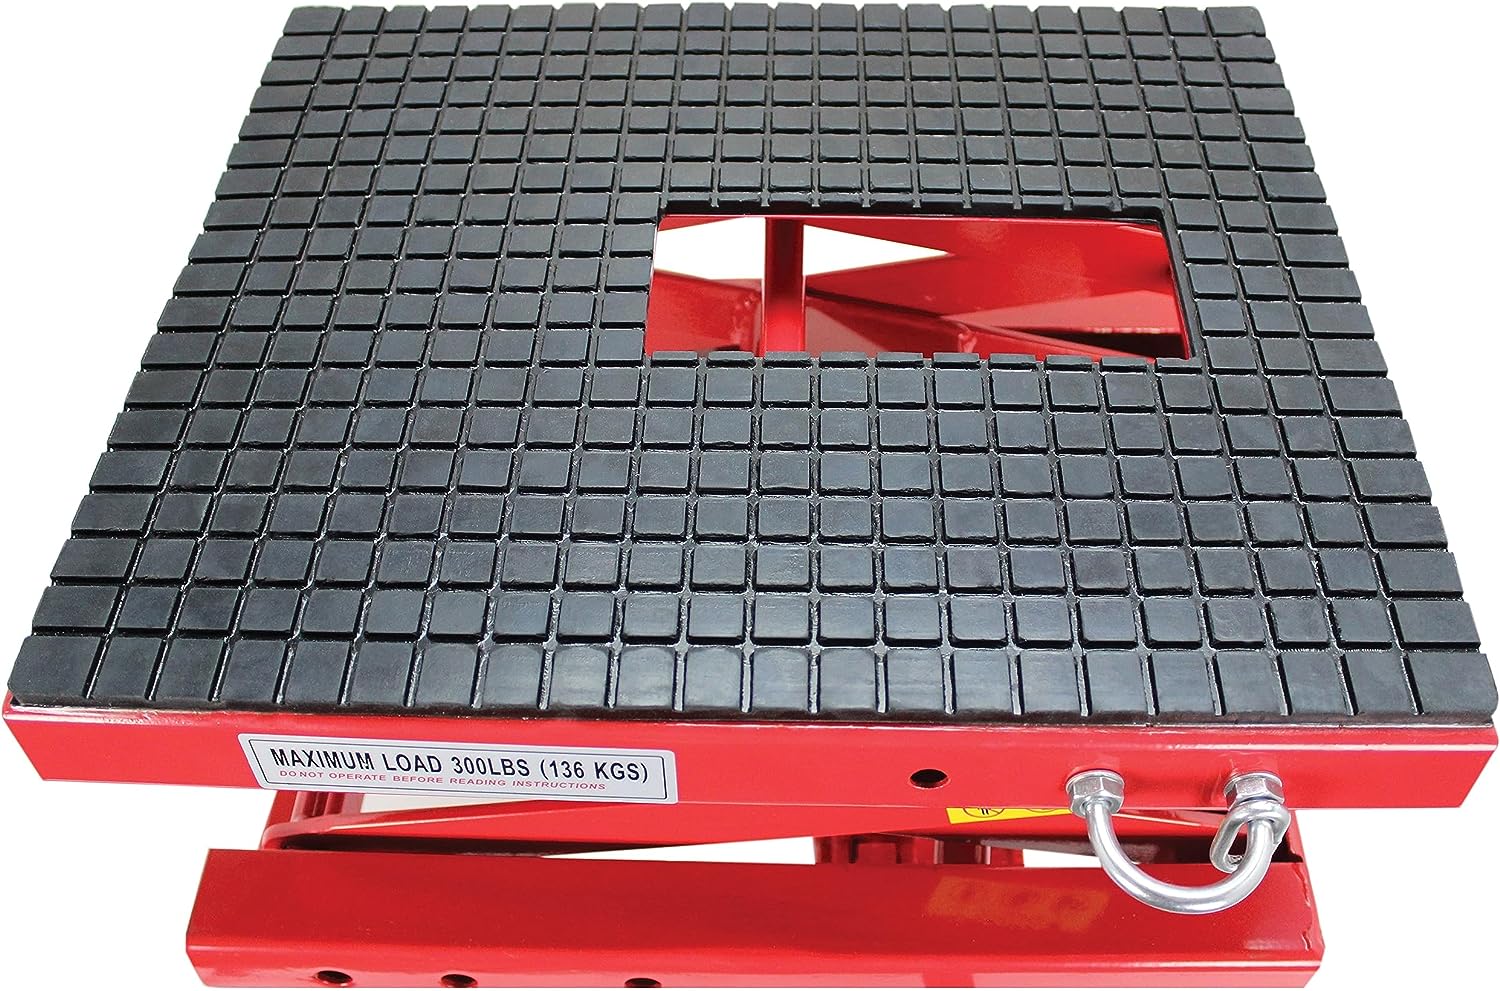 Extreme Max 5001.5083 Ultra-Stabile Hydraulic Motorcycle Lift Table - $105